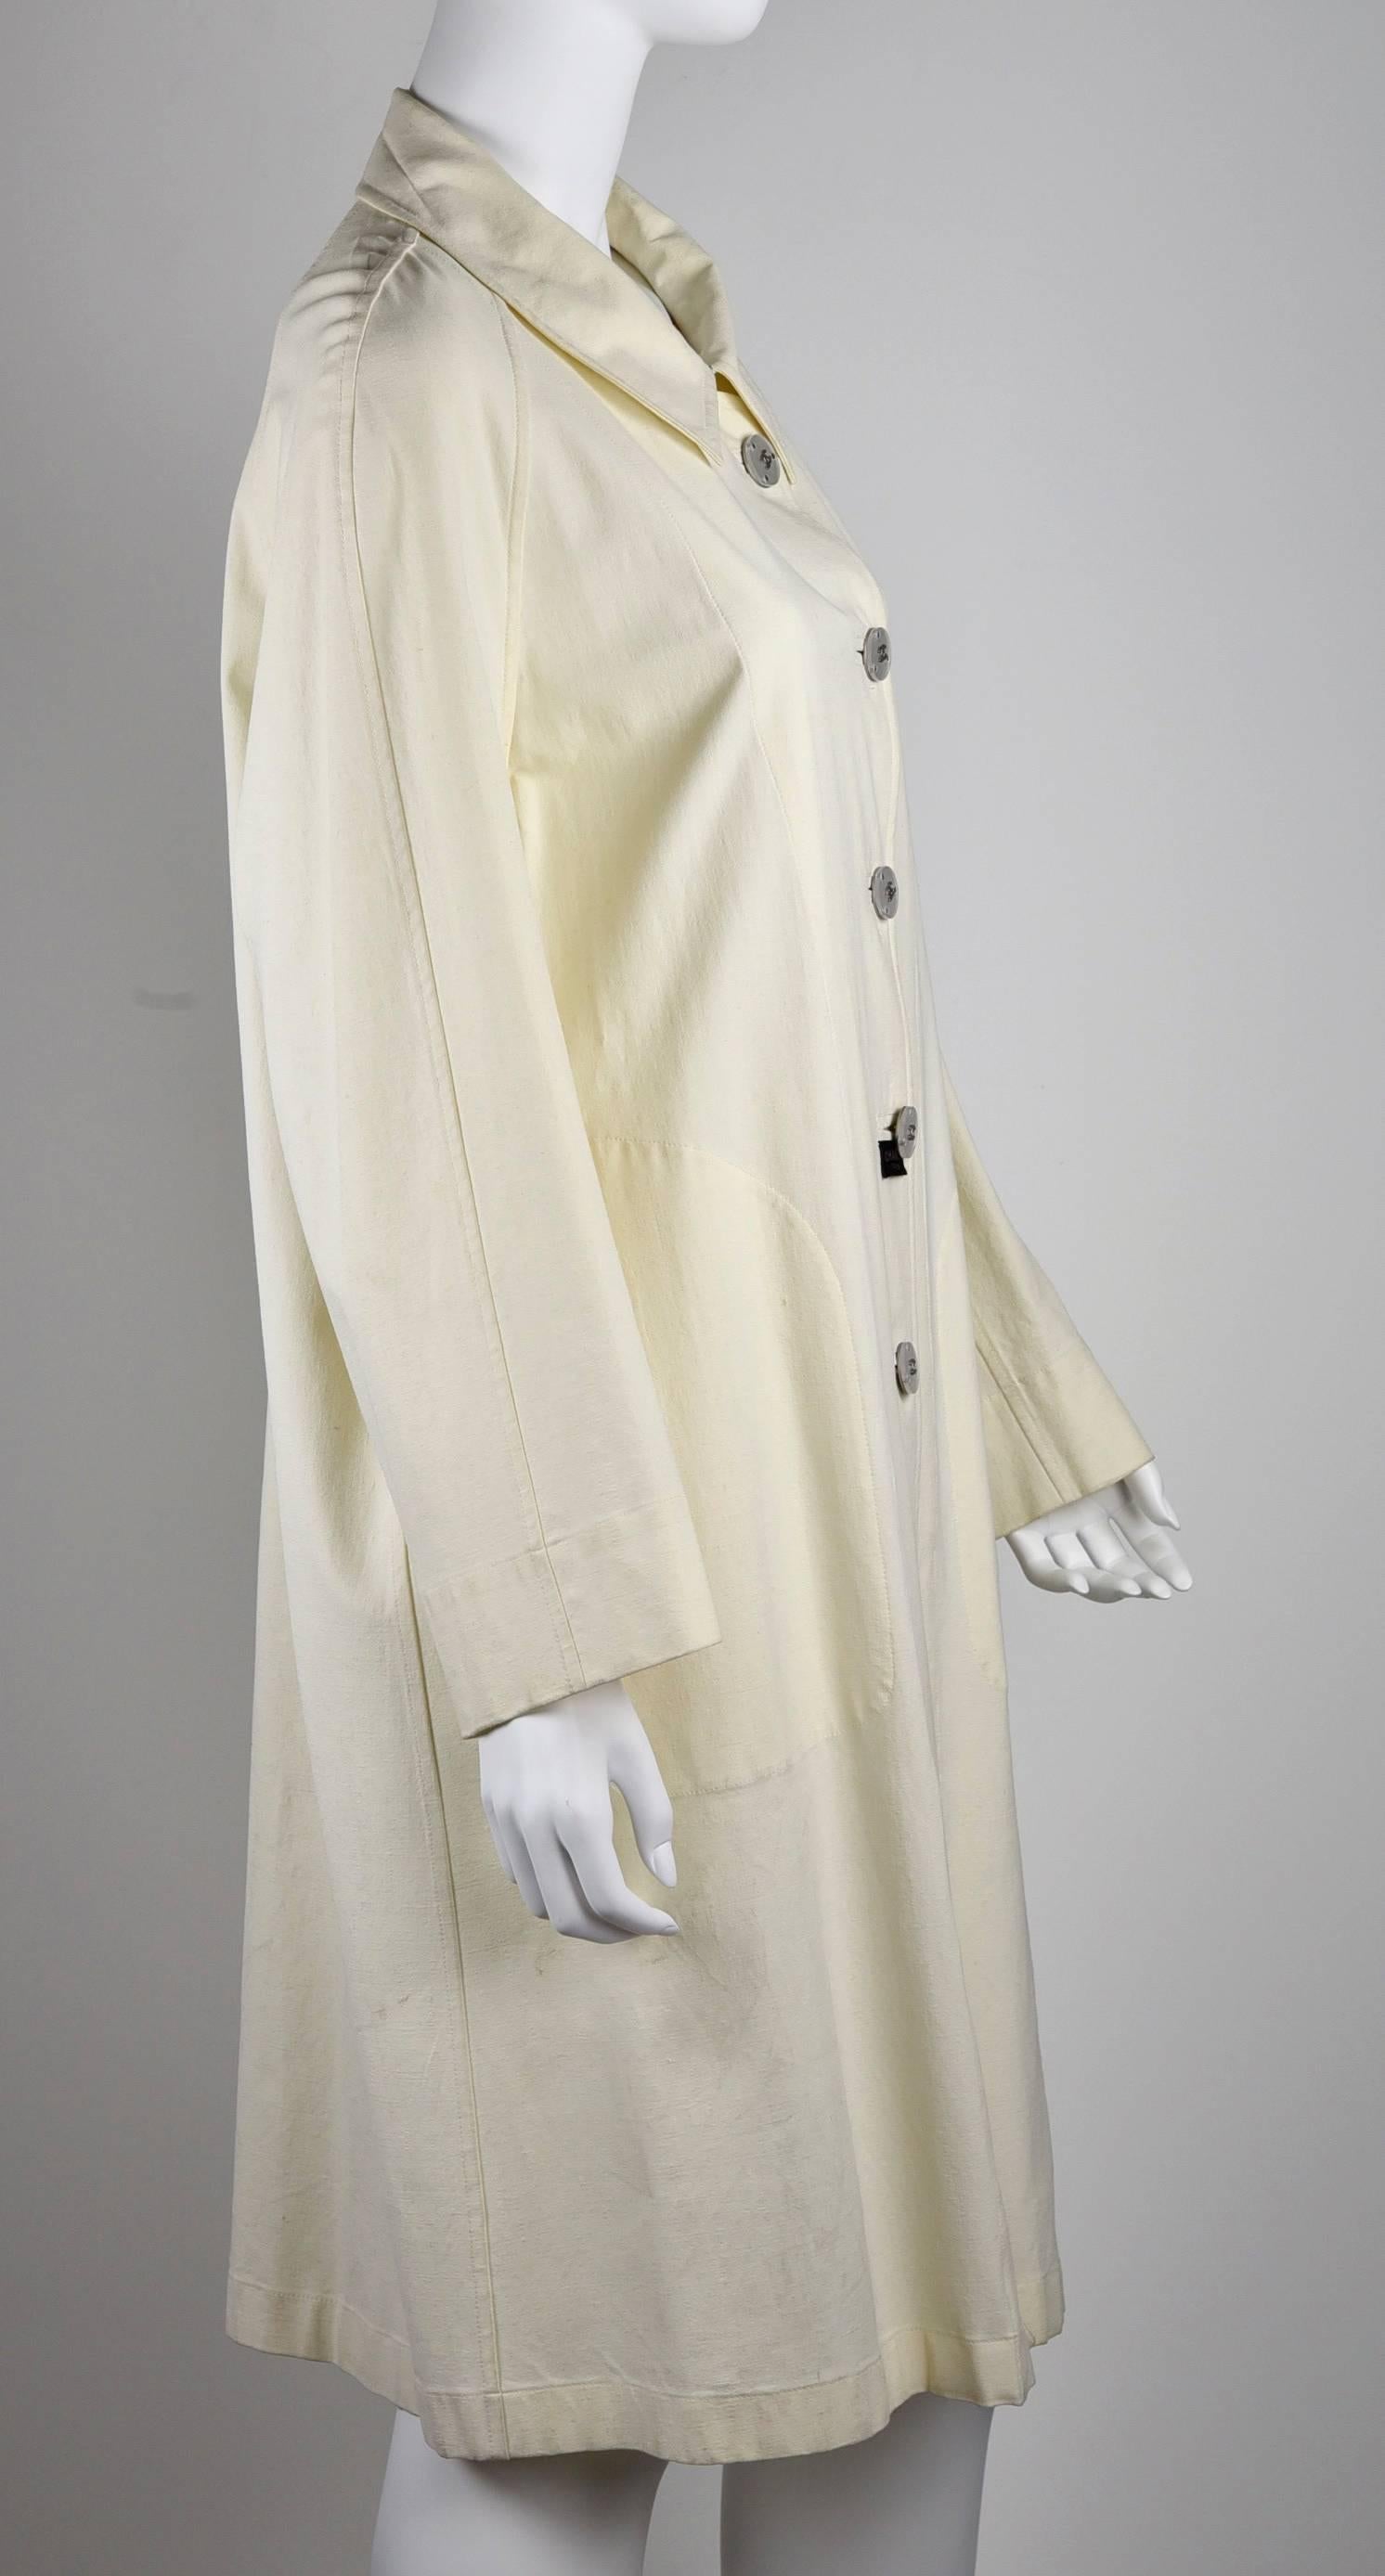 A summer raincoat with a waterproof inside.  Great lightweight coat for travel. Fabric is 66% rayon, 22% linen, 9% spandex 3% nylon. It has a nice linen texture look with stretch.
Chanel #P12838V07399